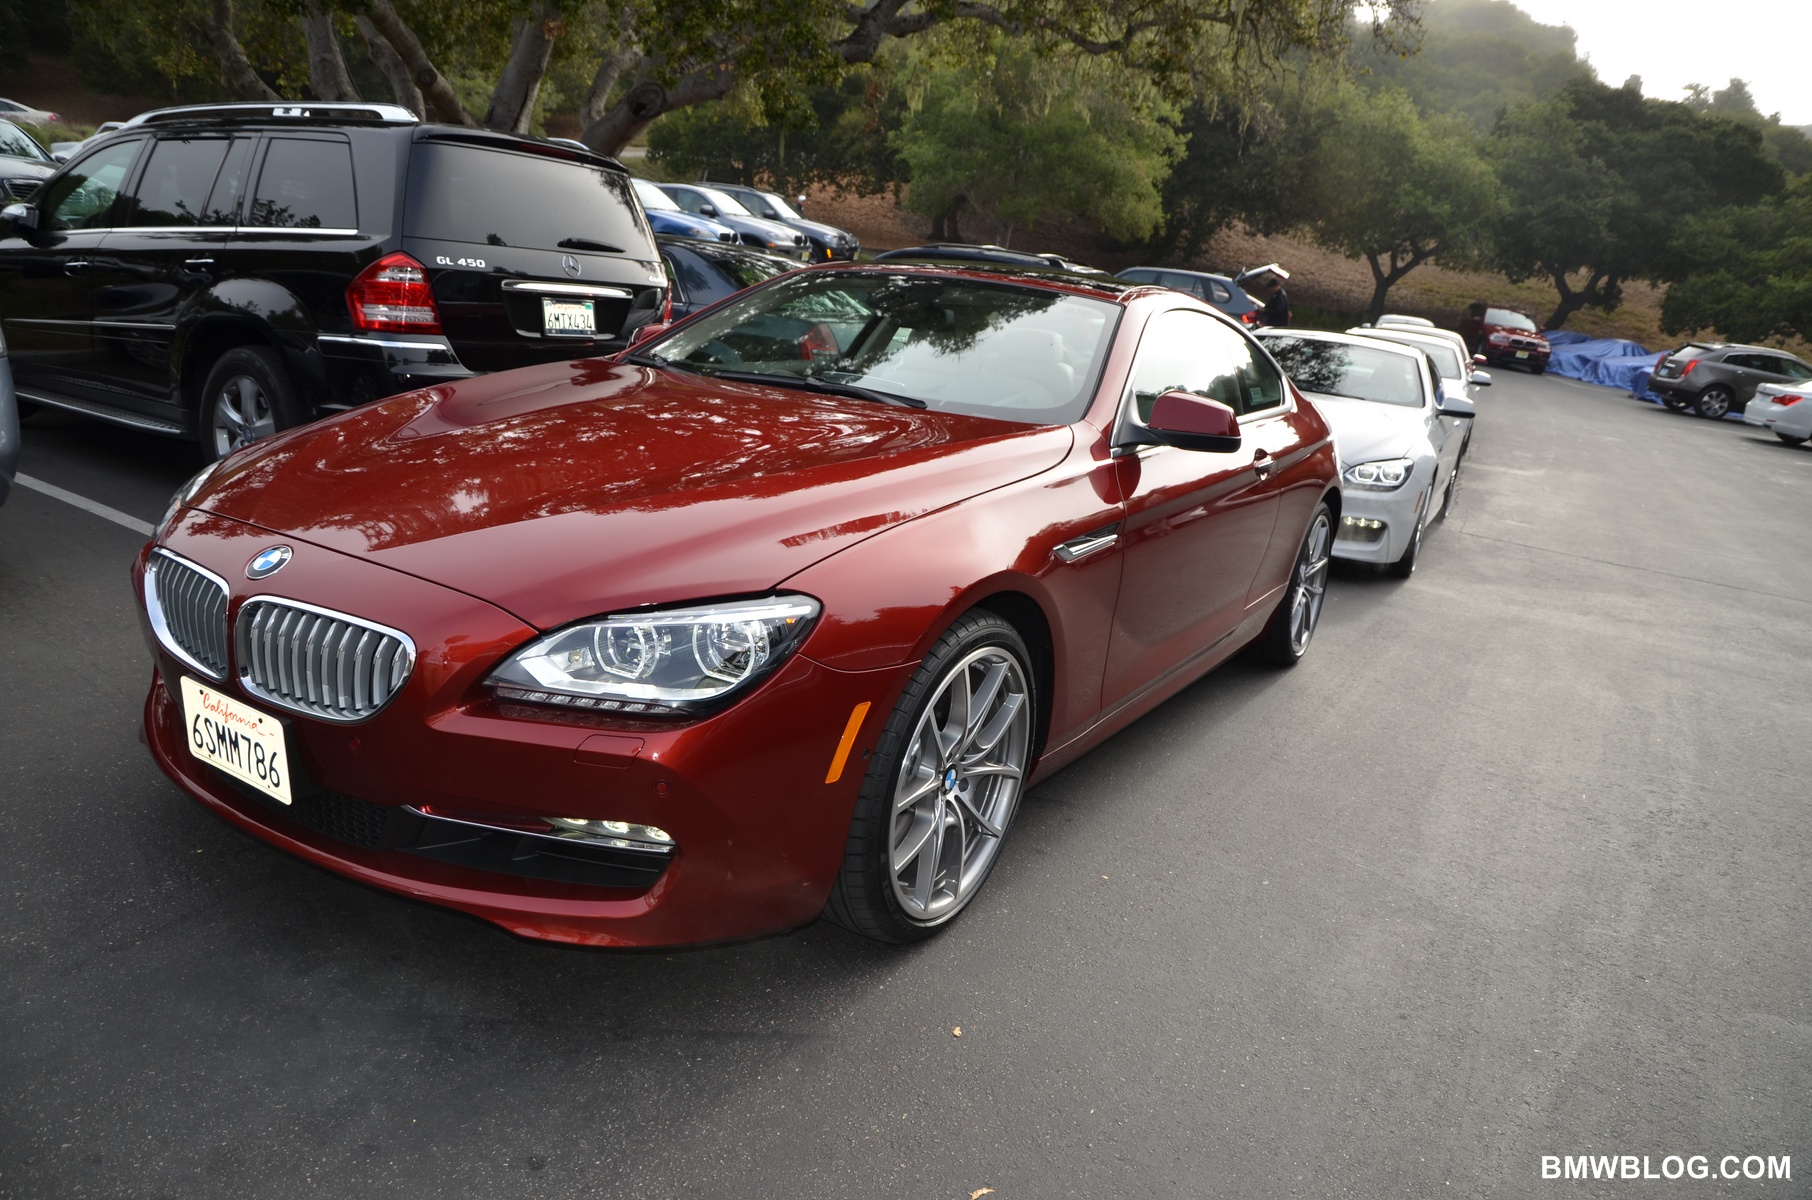 Video: 2012 BMW 650i Coupe with M-Sport Package - BMW BLOG